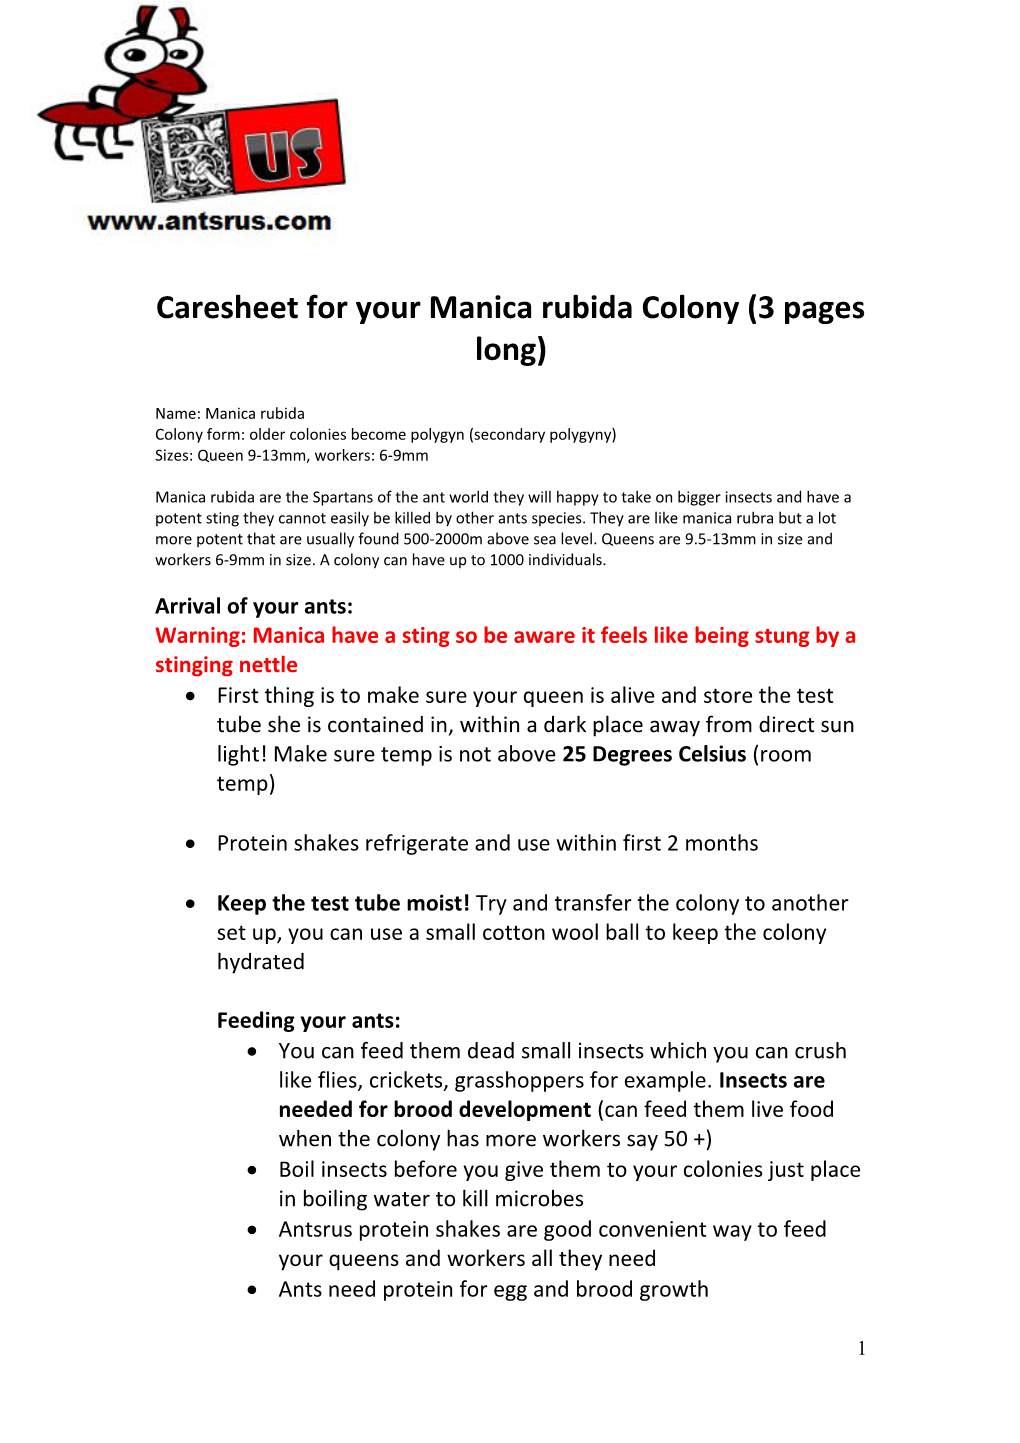 Caresheet for Your Manica Rubida Colony (3 Pages Long)